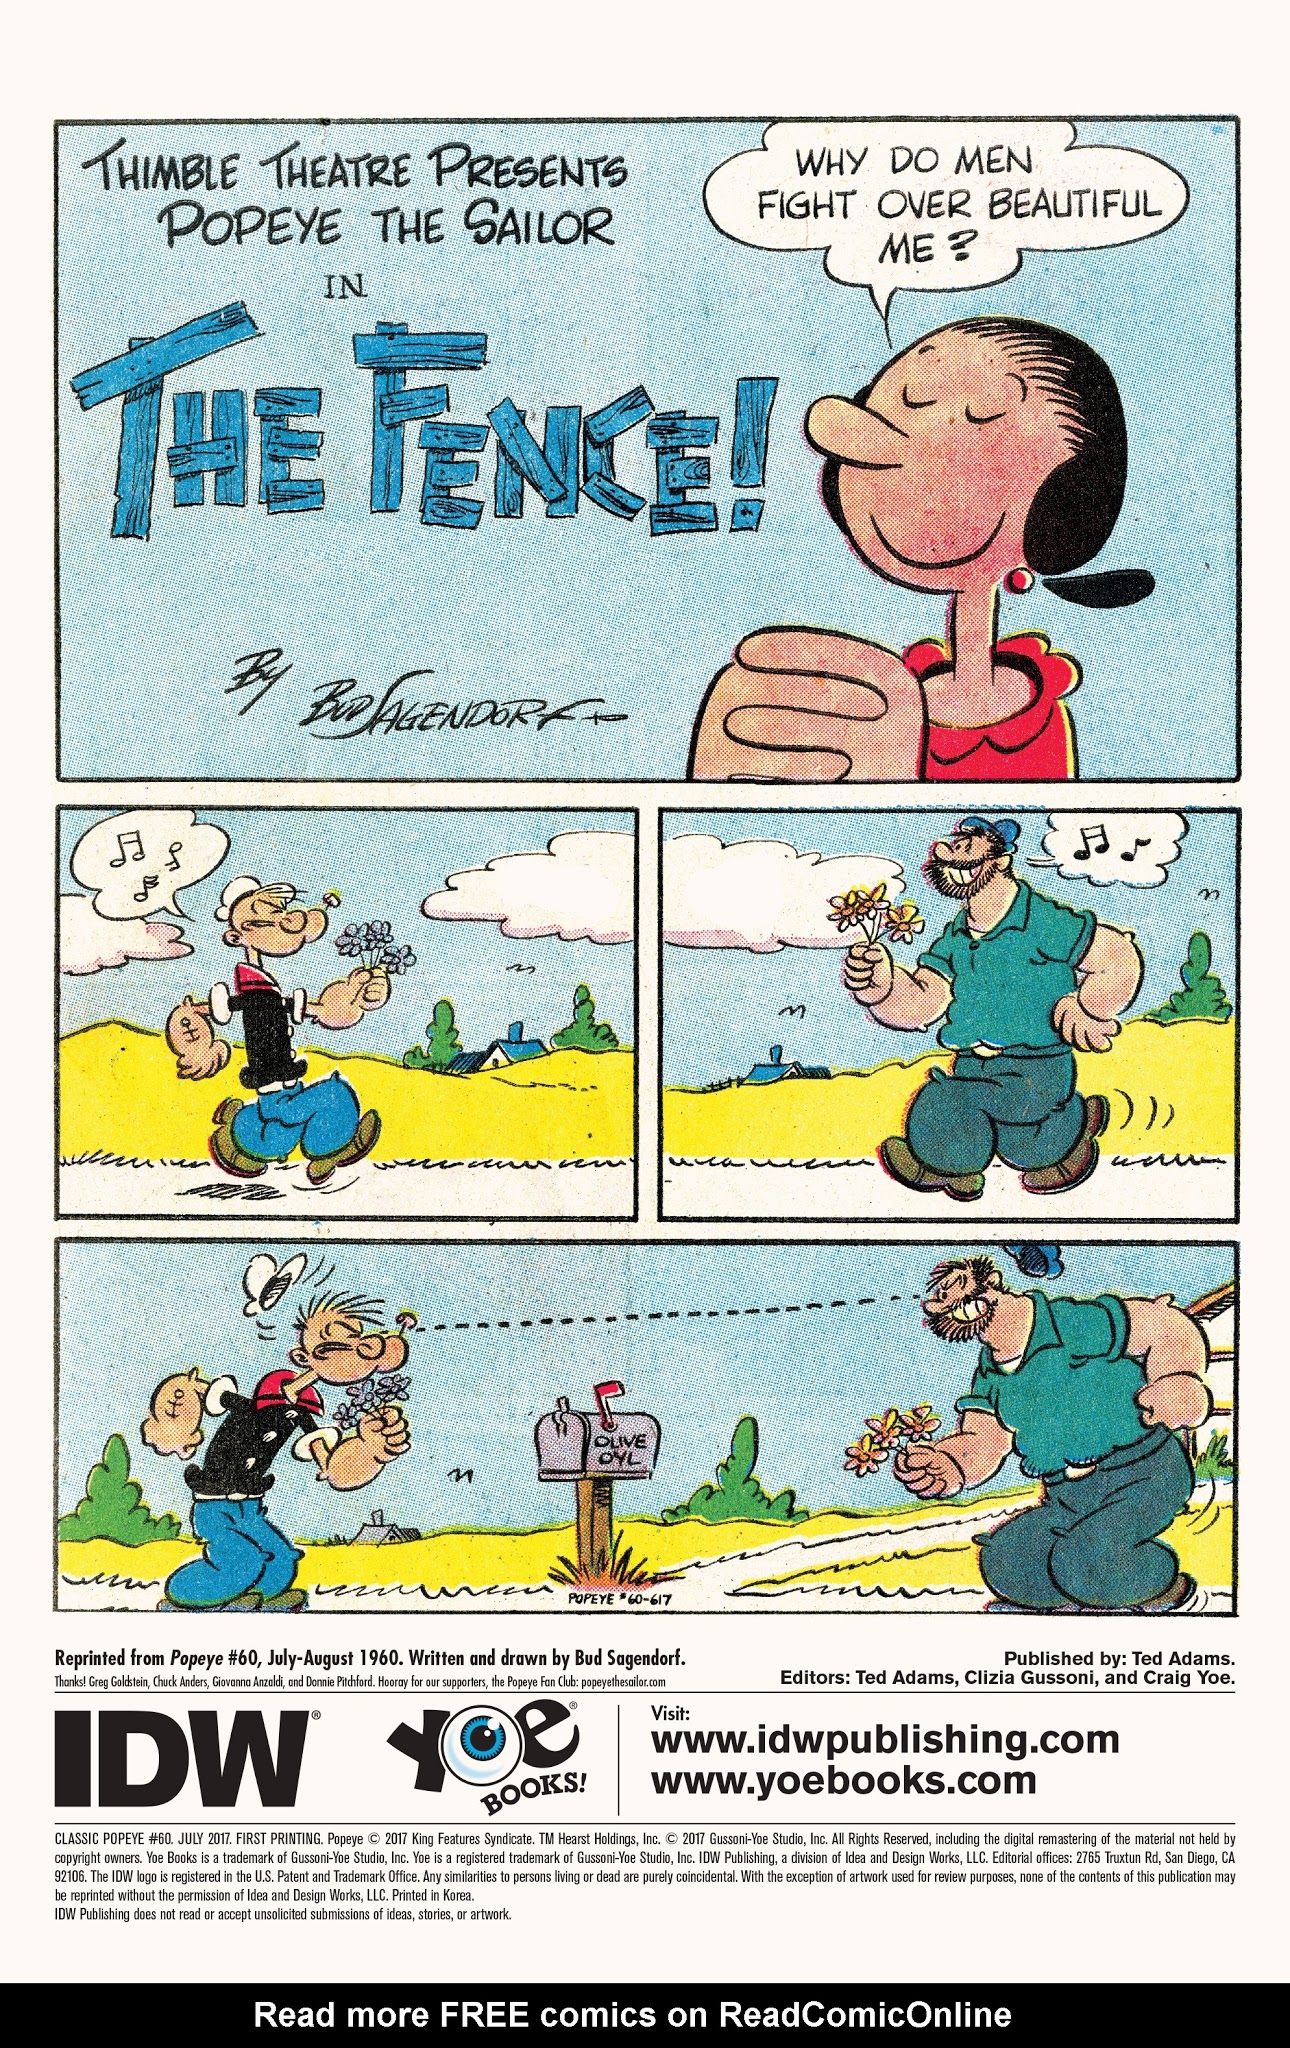 Read online Classic Popeye comic -  Issue #60 - 3